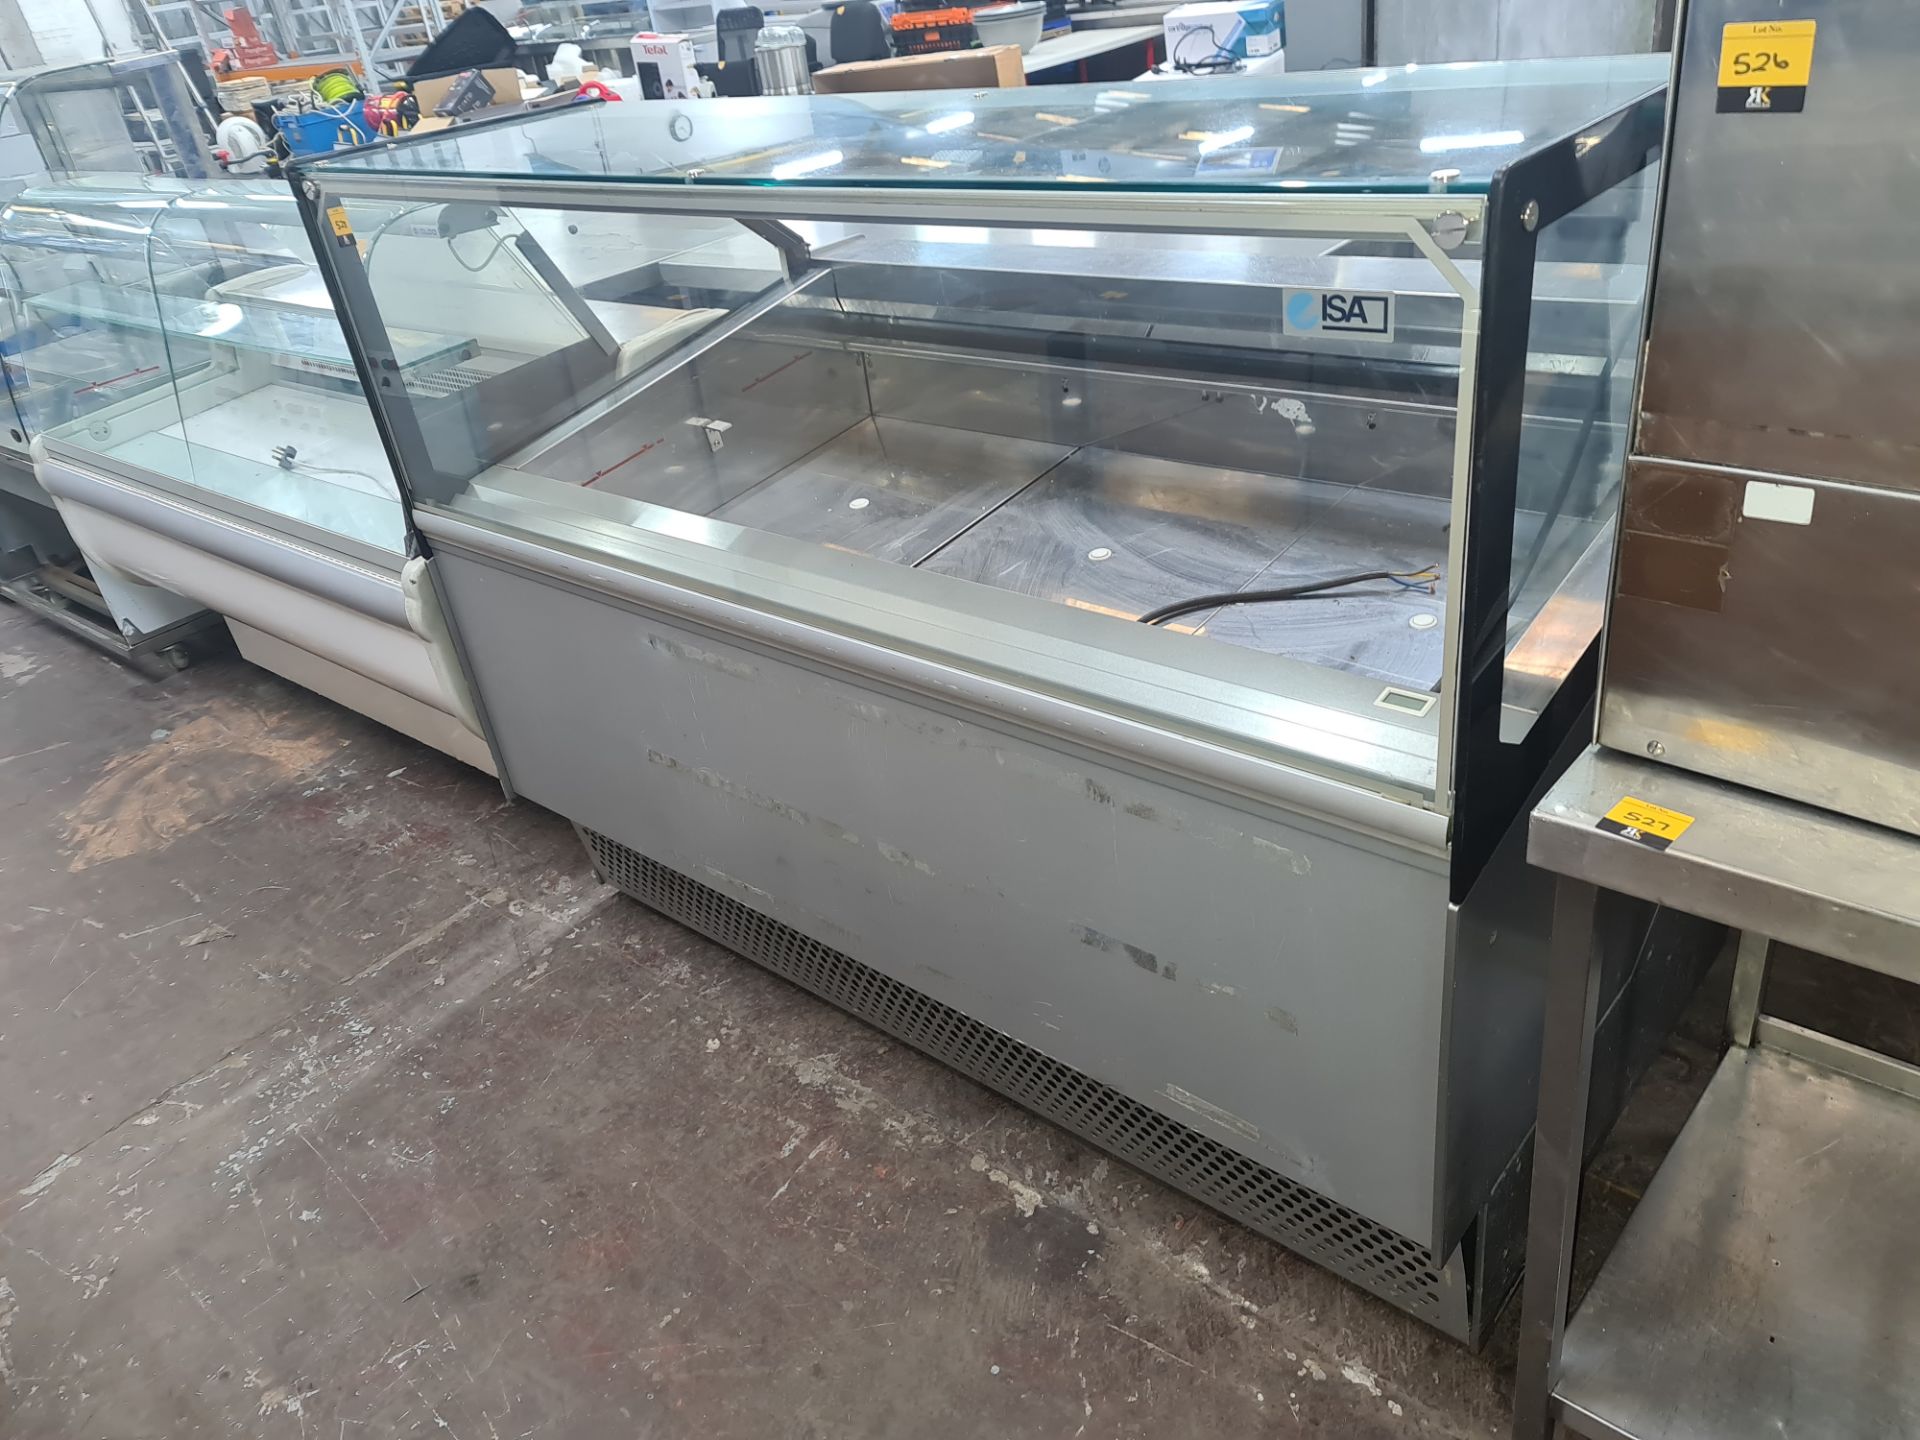 Millenium ST.18 refrigerated serve over counter, measuring approx. 1680mm x 1060mm x 1310mm